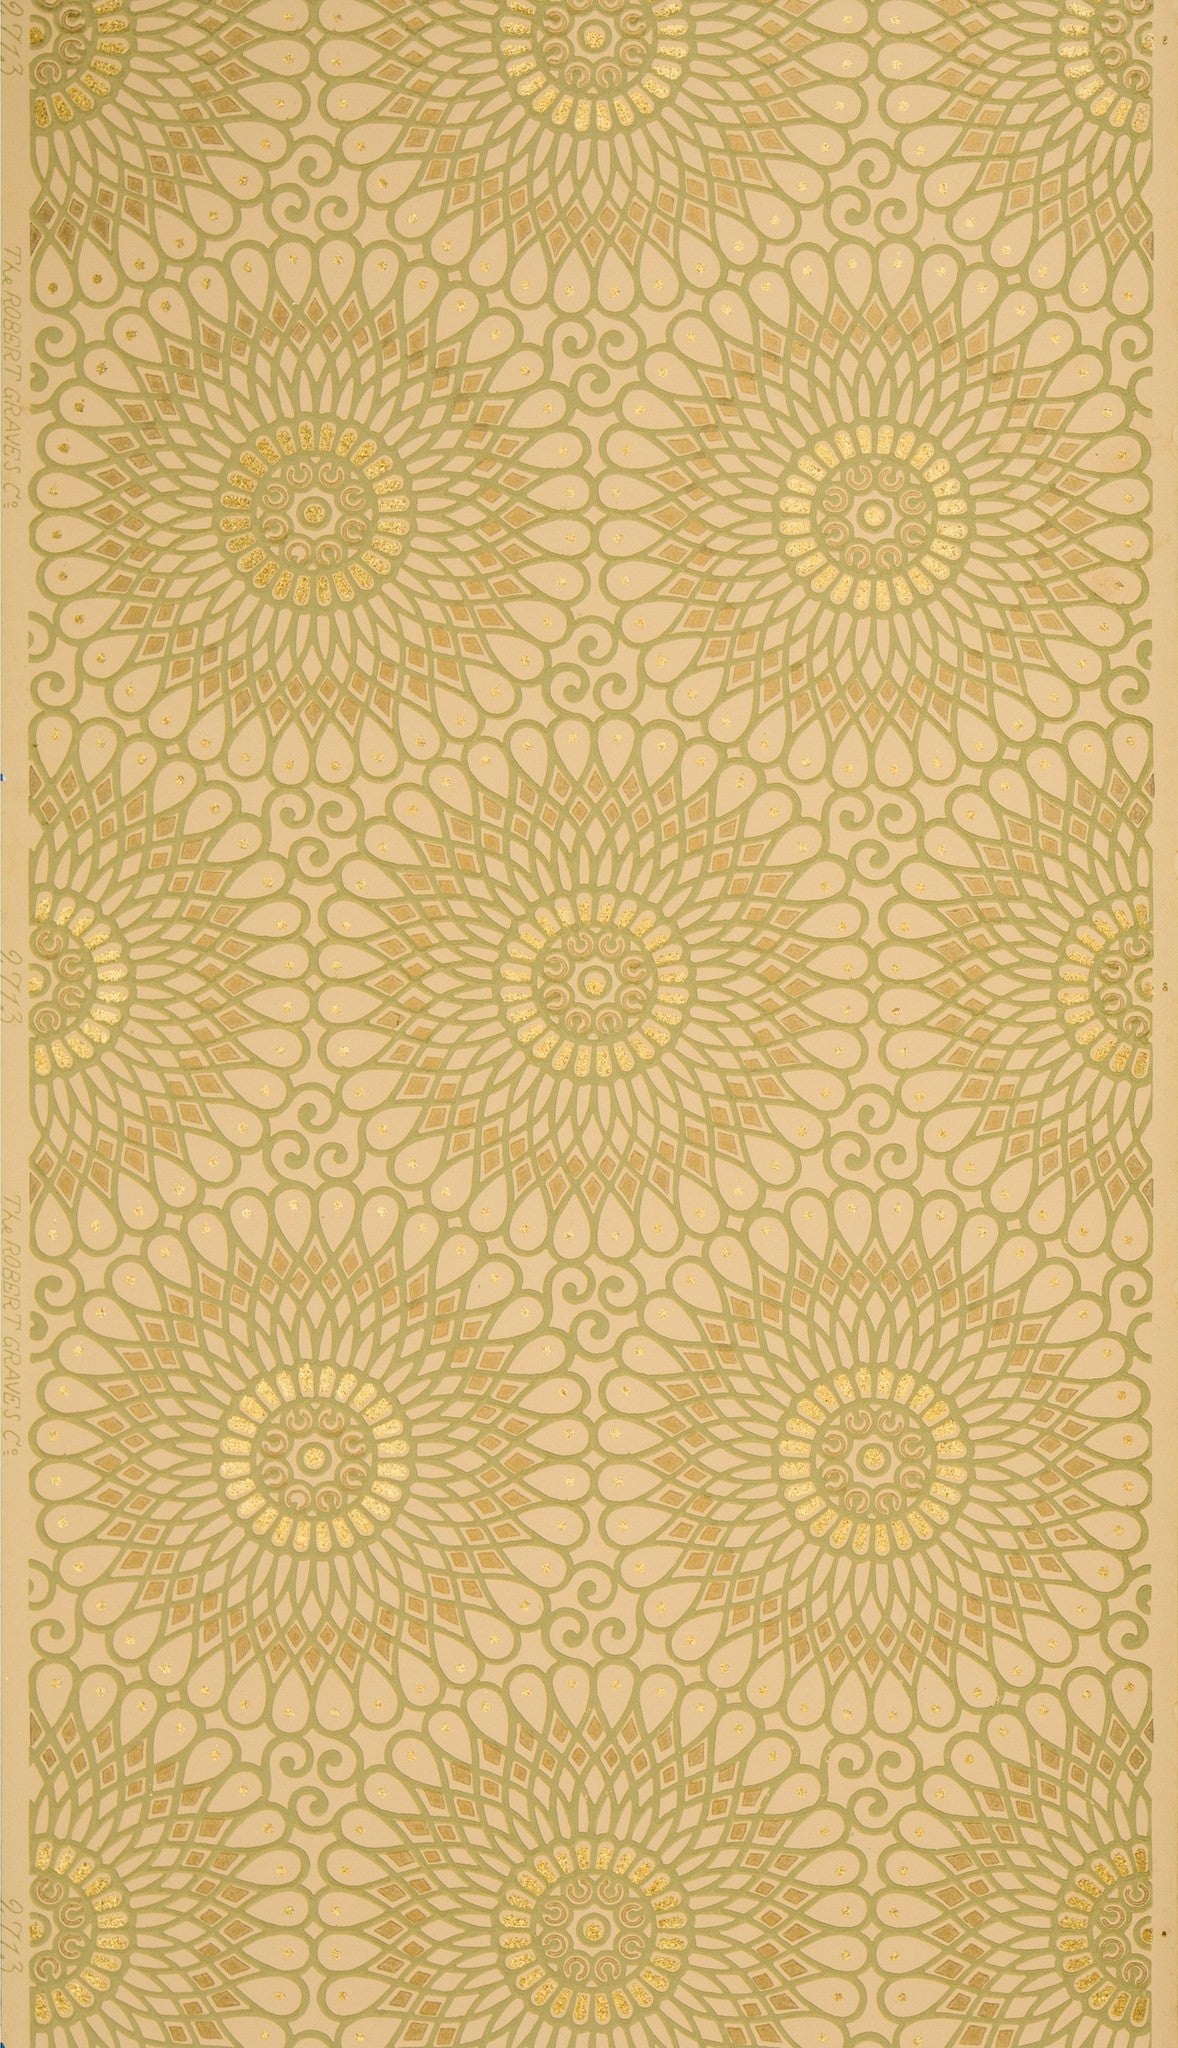 Spirographic Filigree Circles with Flitter - Antique Wallpaper Remnant